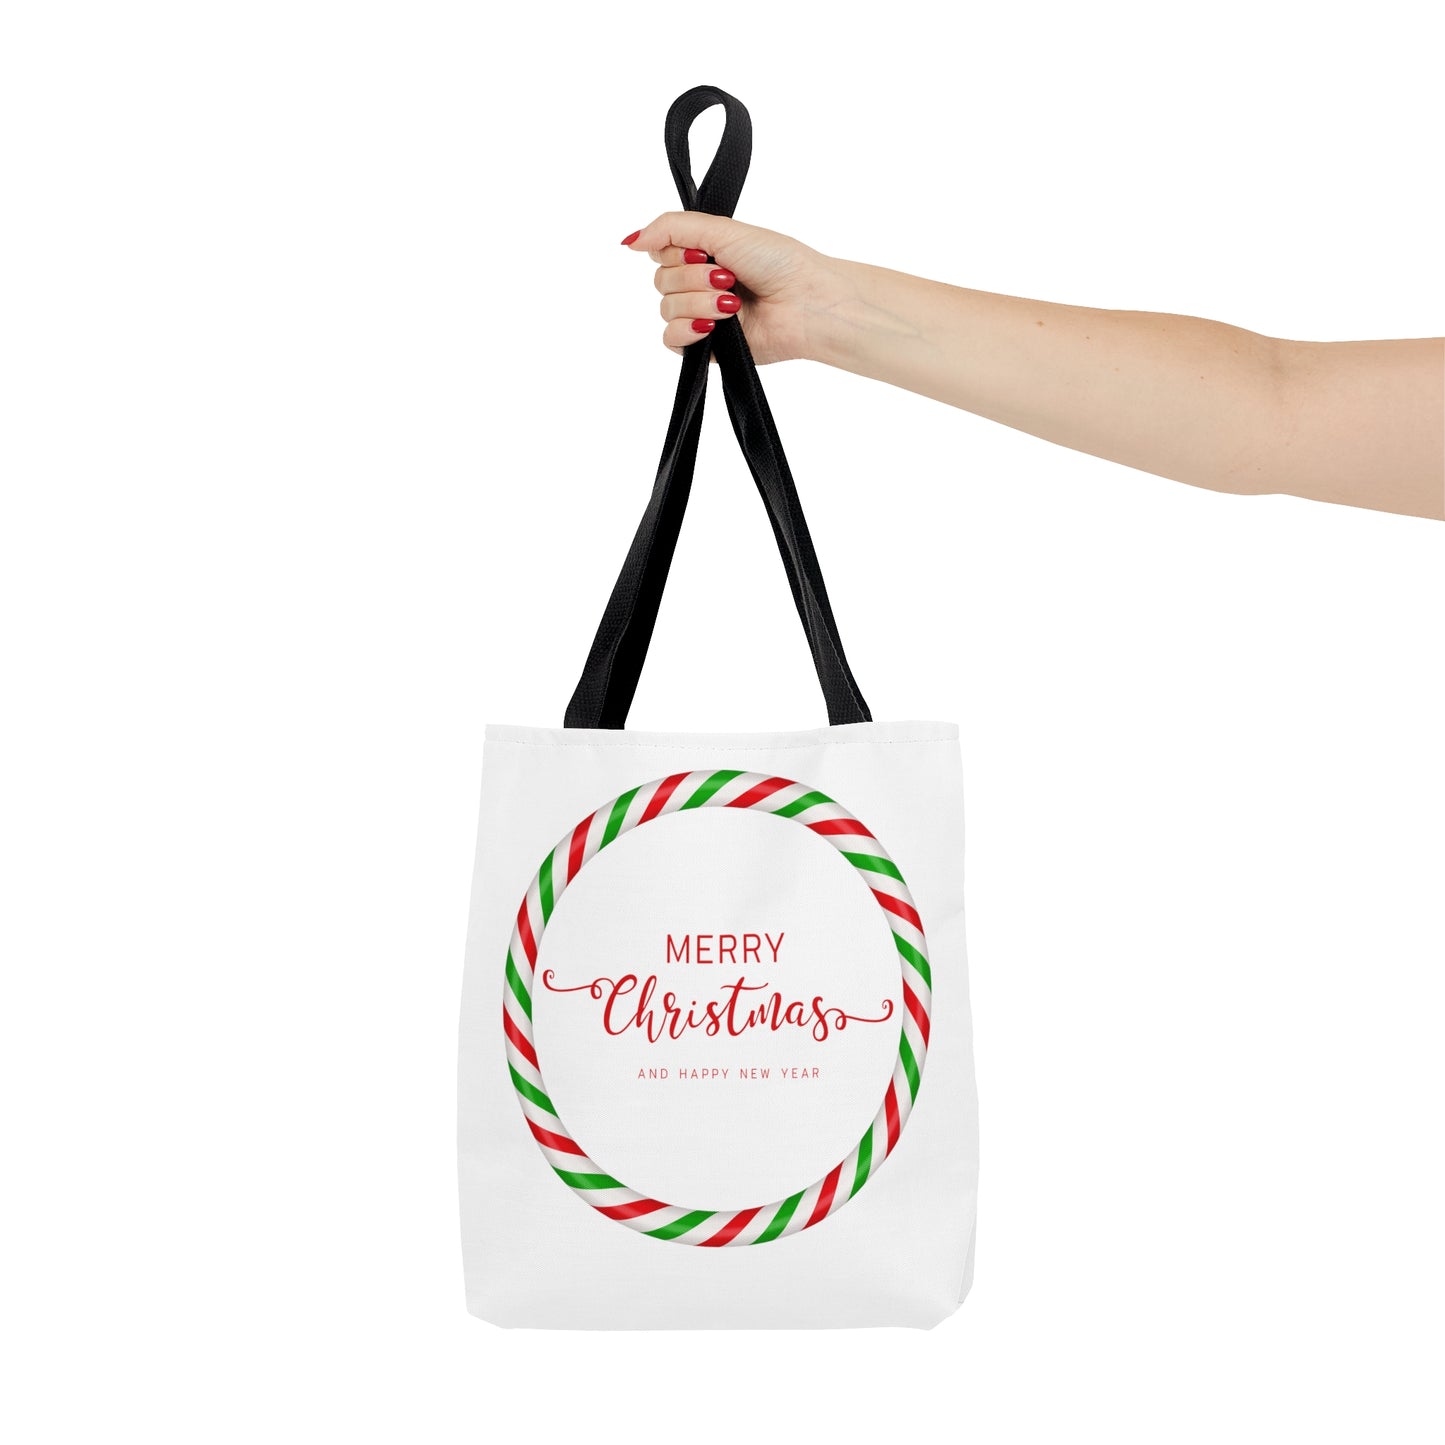 Merry Christmas Printed Tote Bag for Her & Him